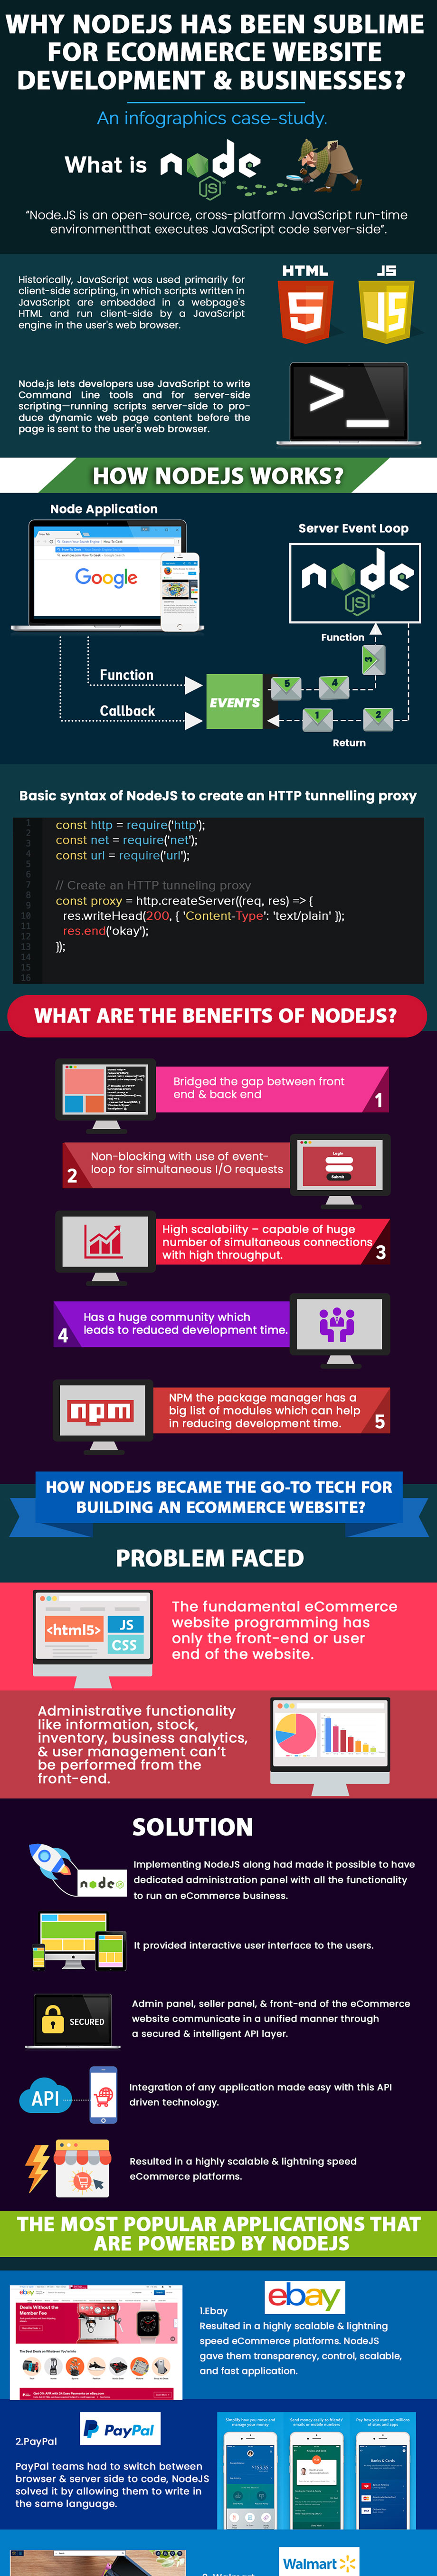 Why Node.js has been sublime for eCommerce website development & businesses - Infographic 1